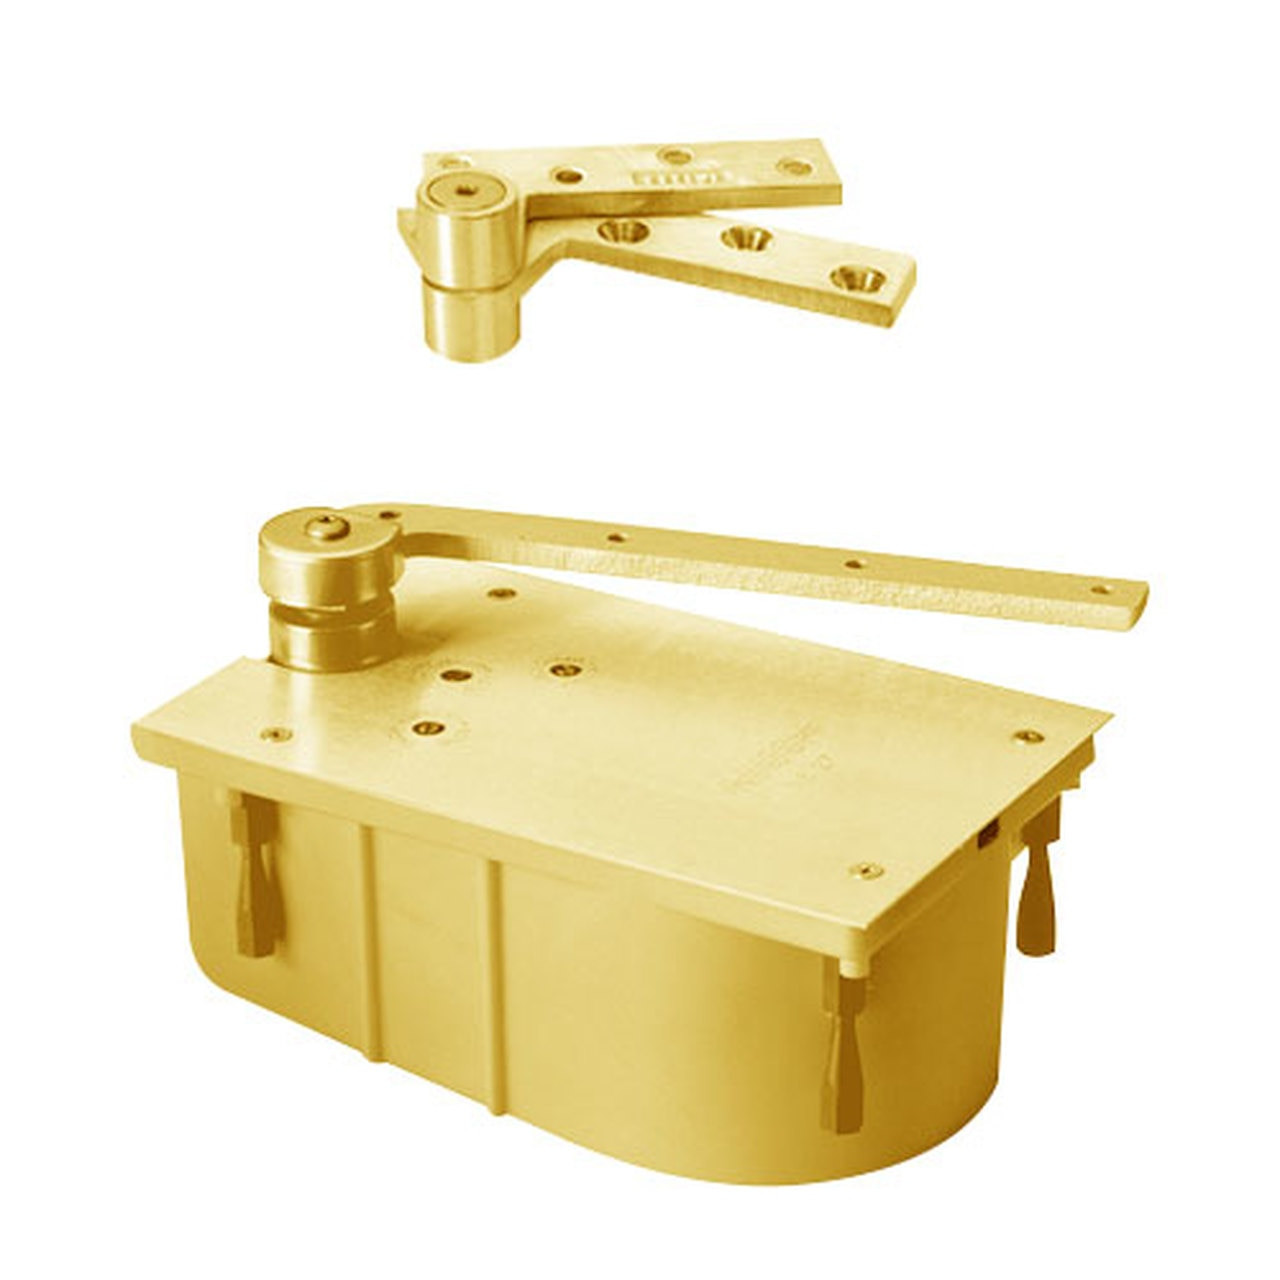 F127-105N-LCC-LH-605 Rixson 27 Series Fire Rated Heavy Duty 3/4" Offset Hung Floor Closer in Bright Brass Finish